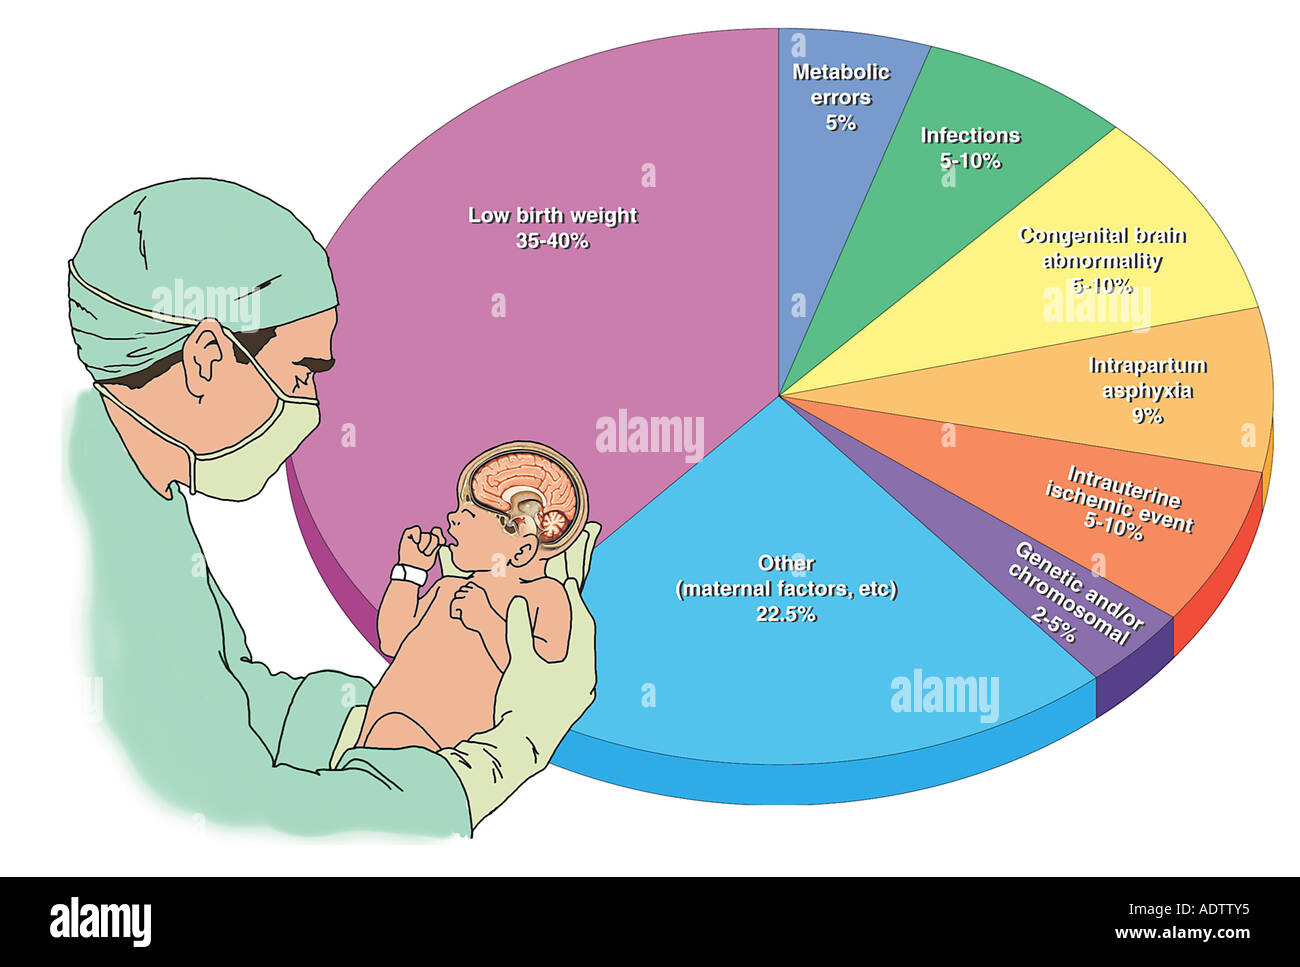 Identified Causes of Cerebral Palsy in the Newborn